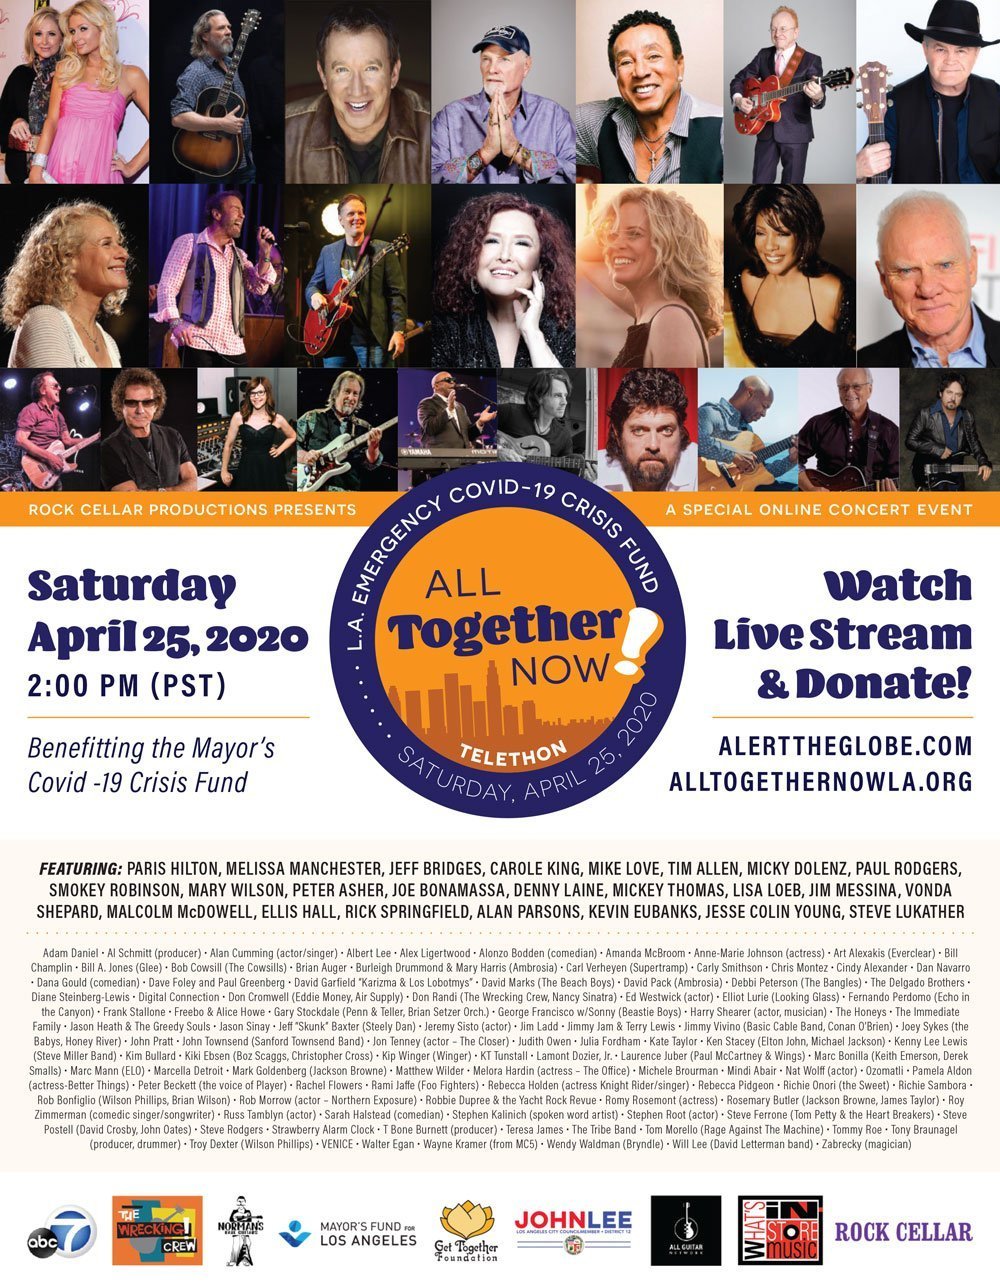 All Together Now Telethon – Saturday, April 25 at 2pm